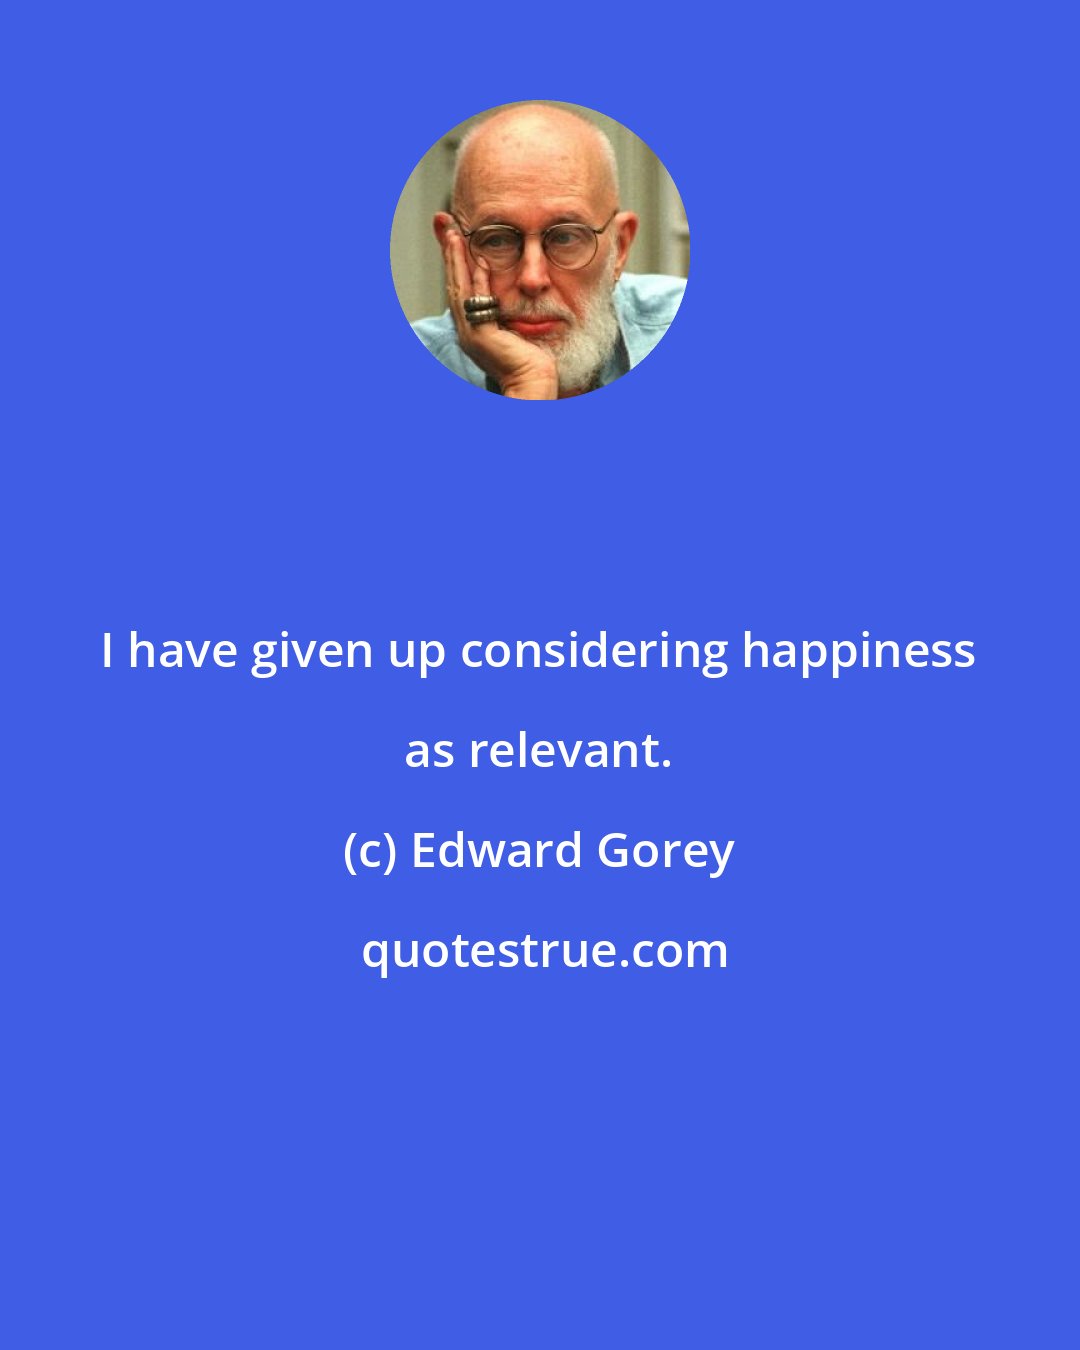 Edward Gorey: I have given up considering happiness as relevant.